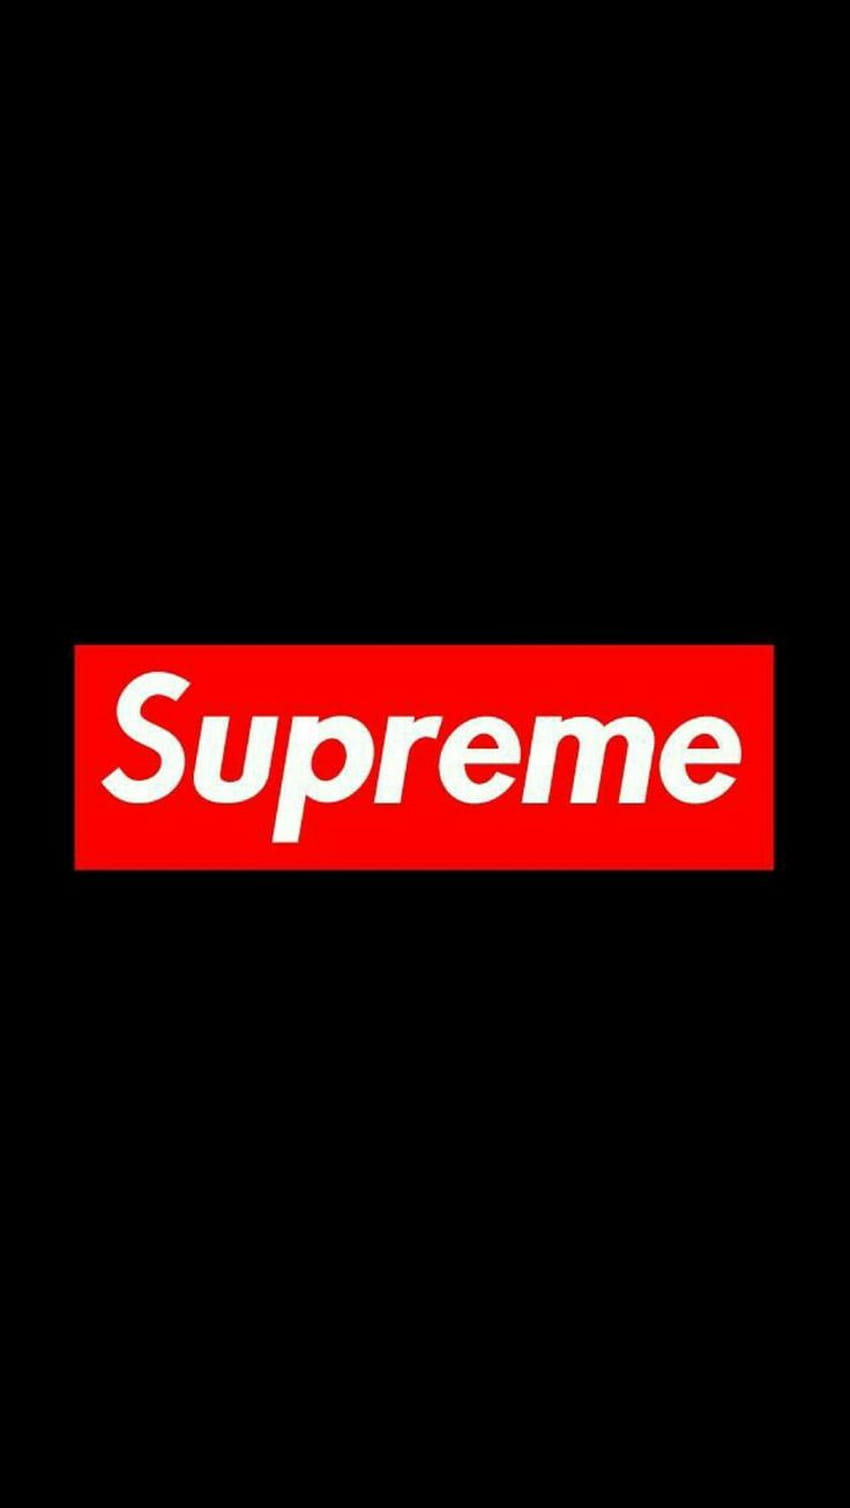 Free download 96] Supreme iPhone Wallpaper on [750x726] for your